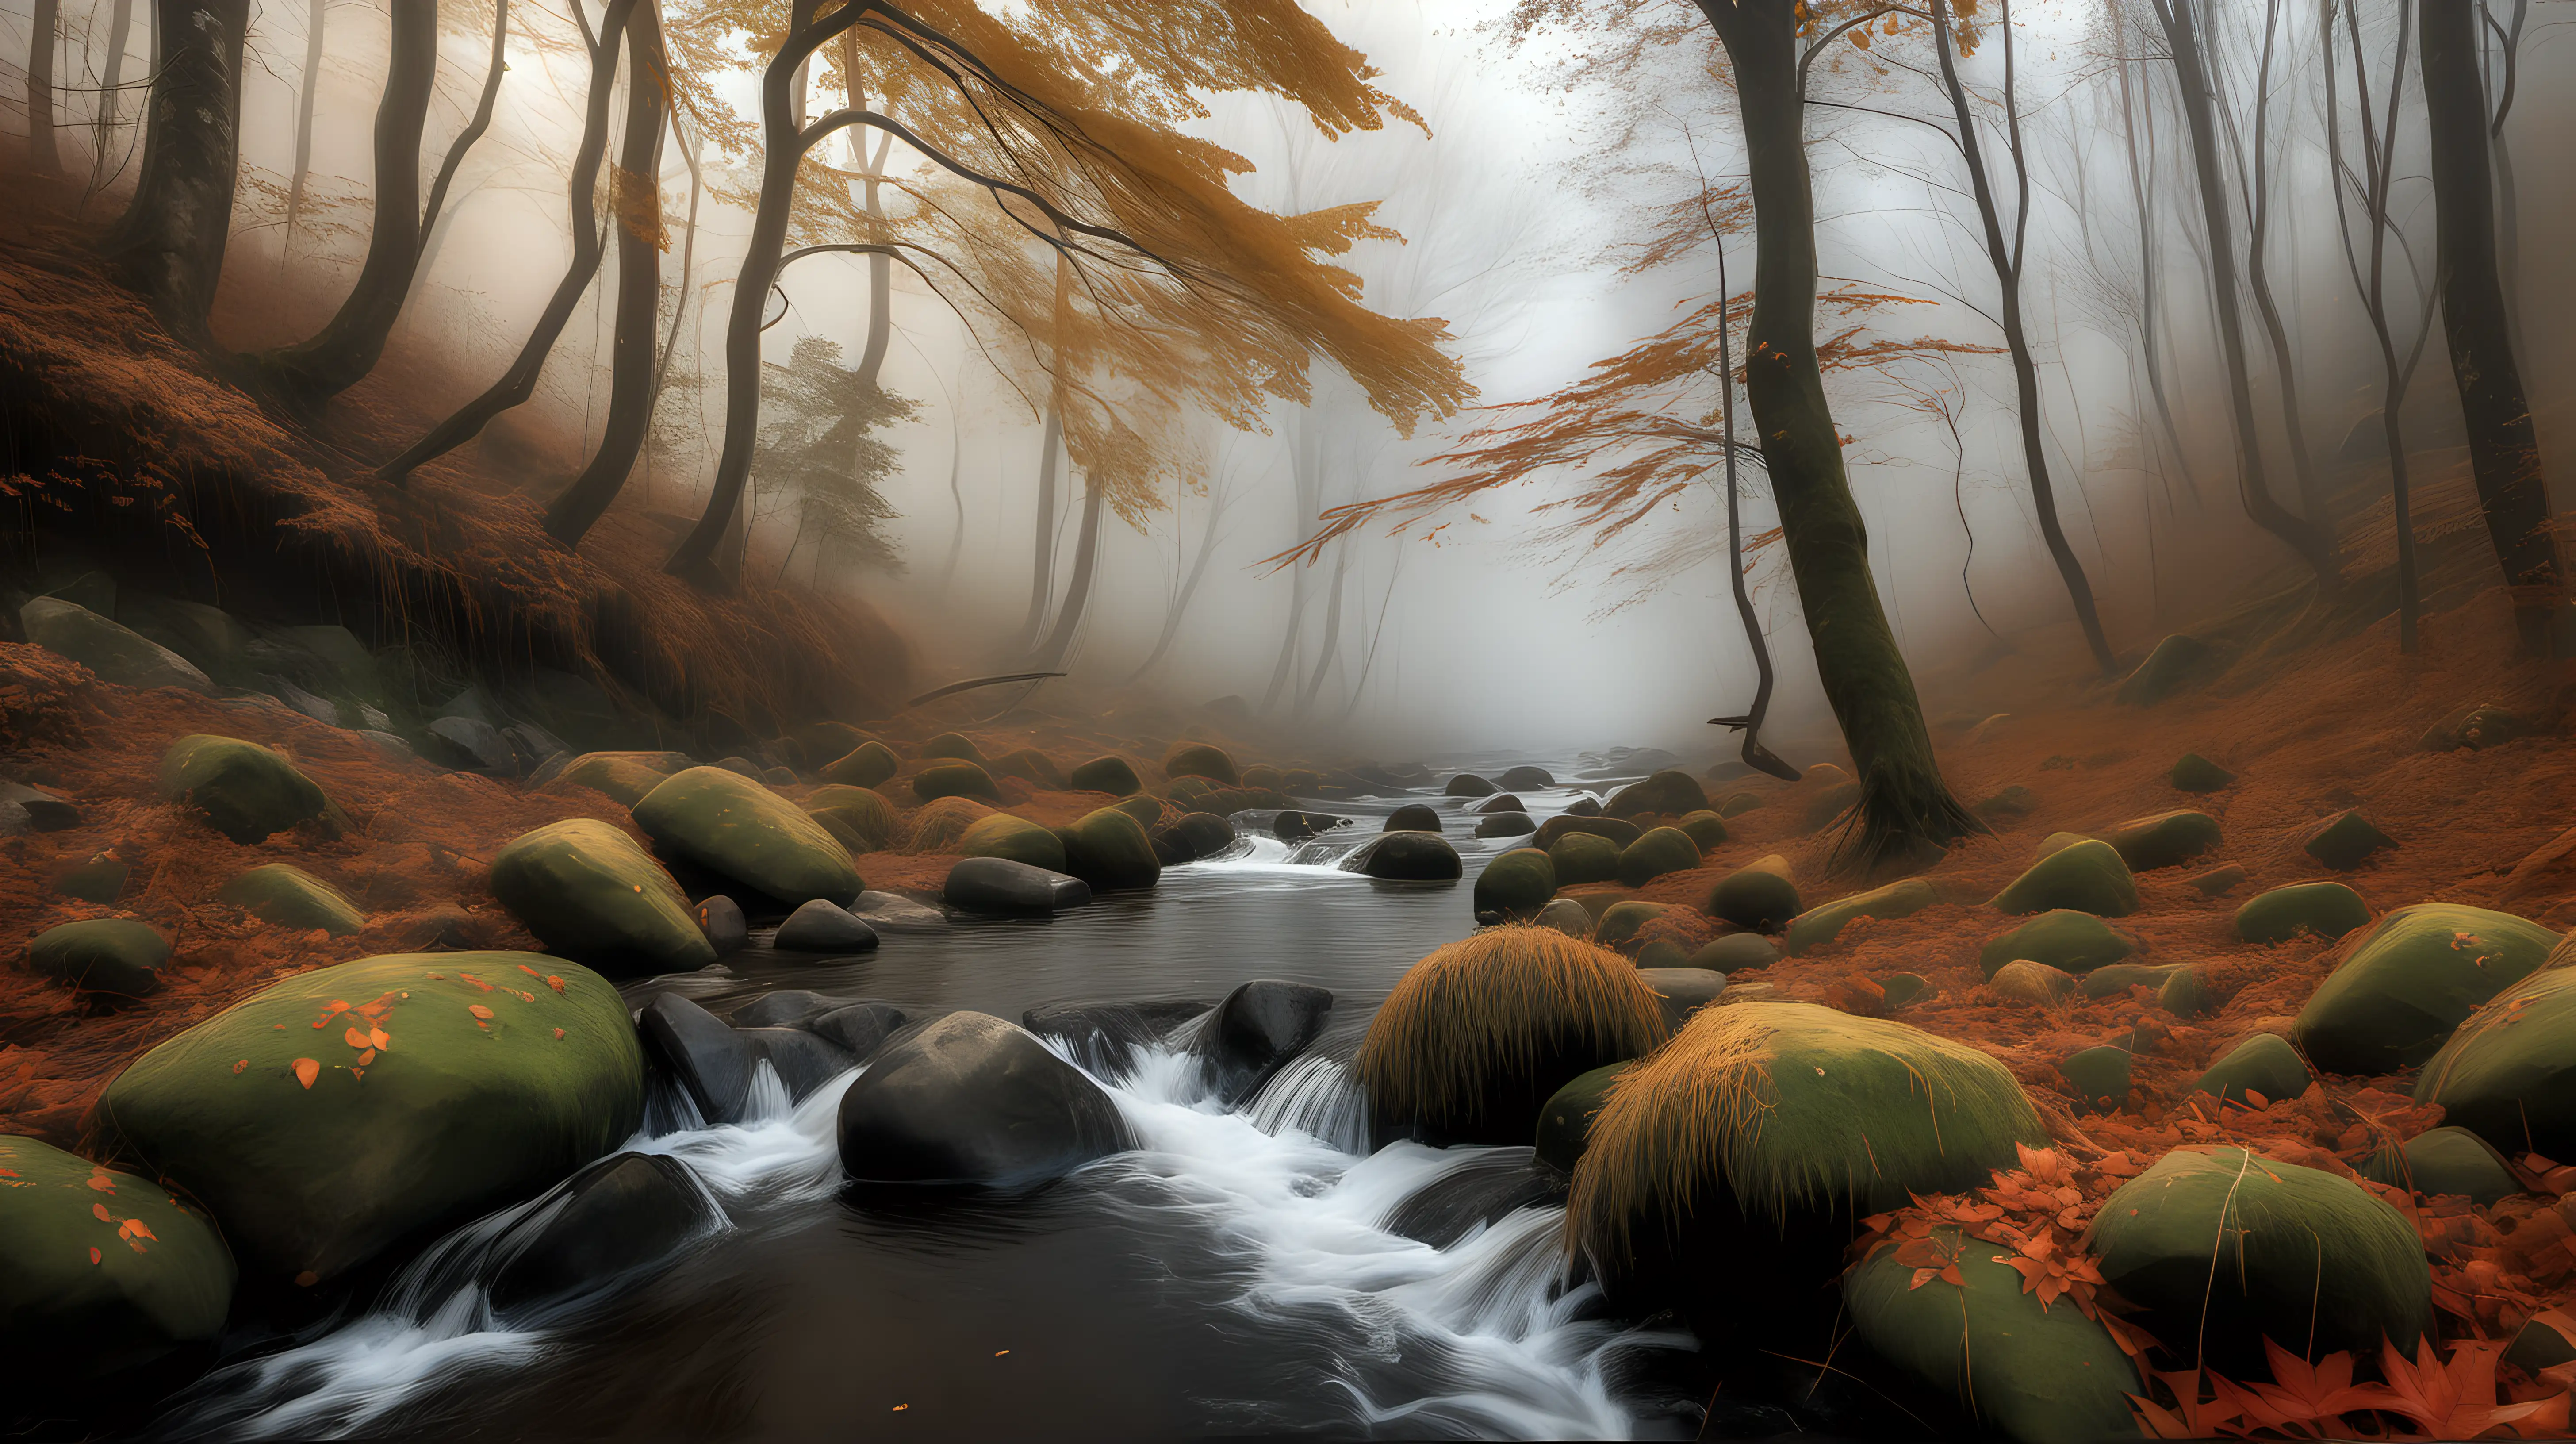 Tranquil Autumn Landscape with Misty Forest and Streaming Waters